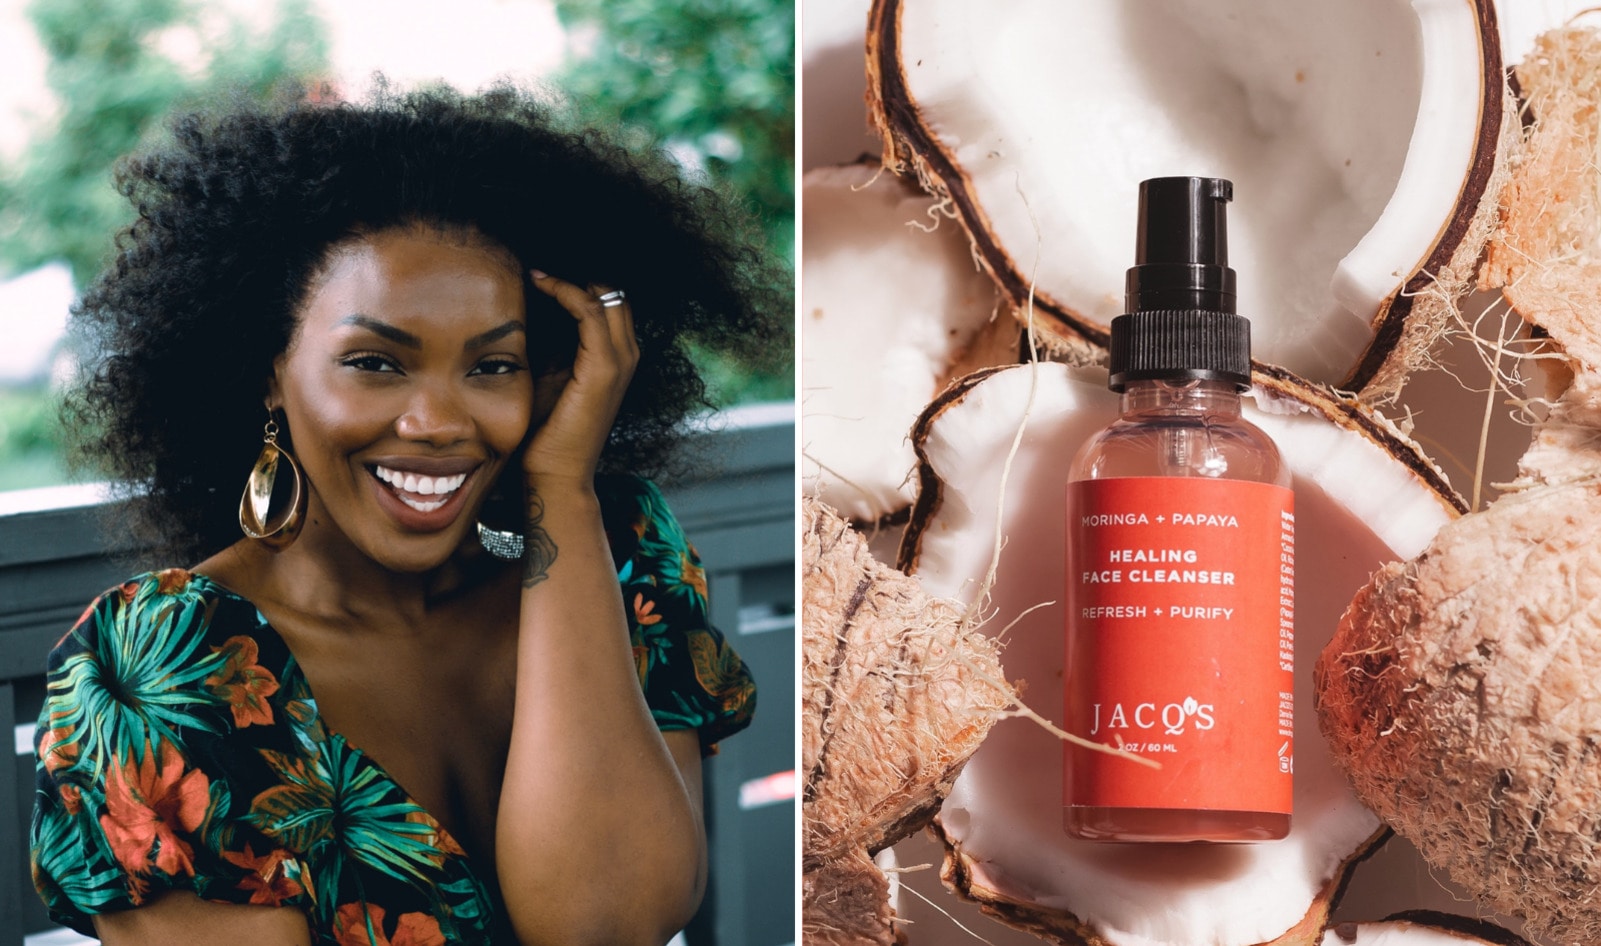 Target Commits $2 Billion to Black-Owned Businesses by 2025, Starting With This Vegan Skincare Brand